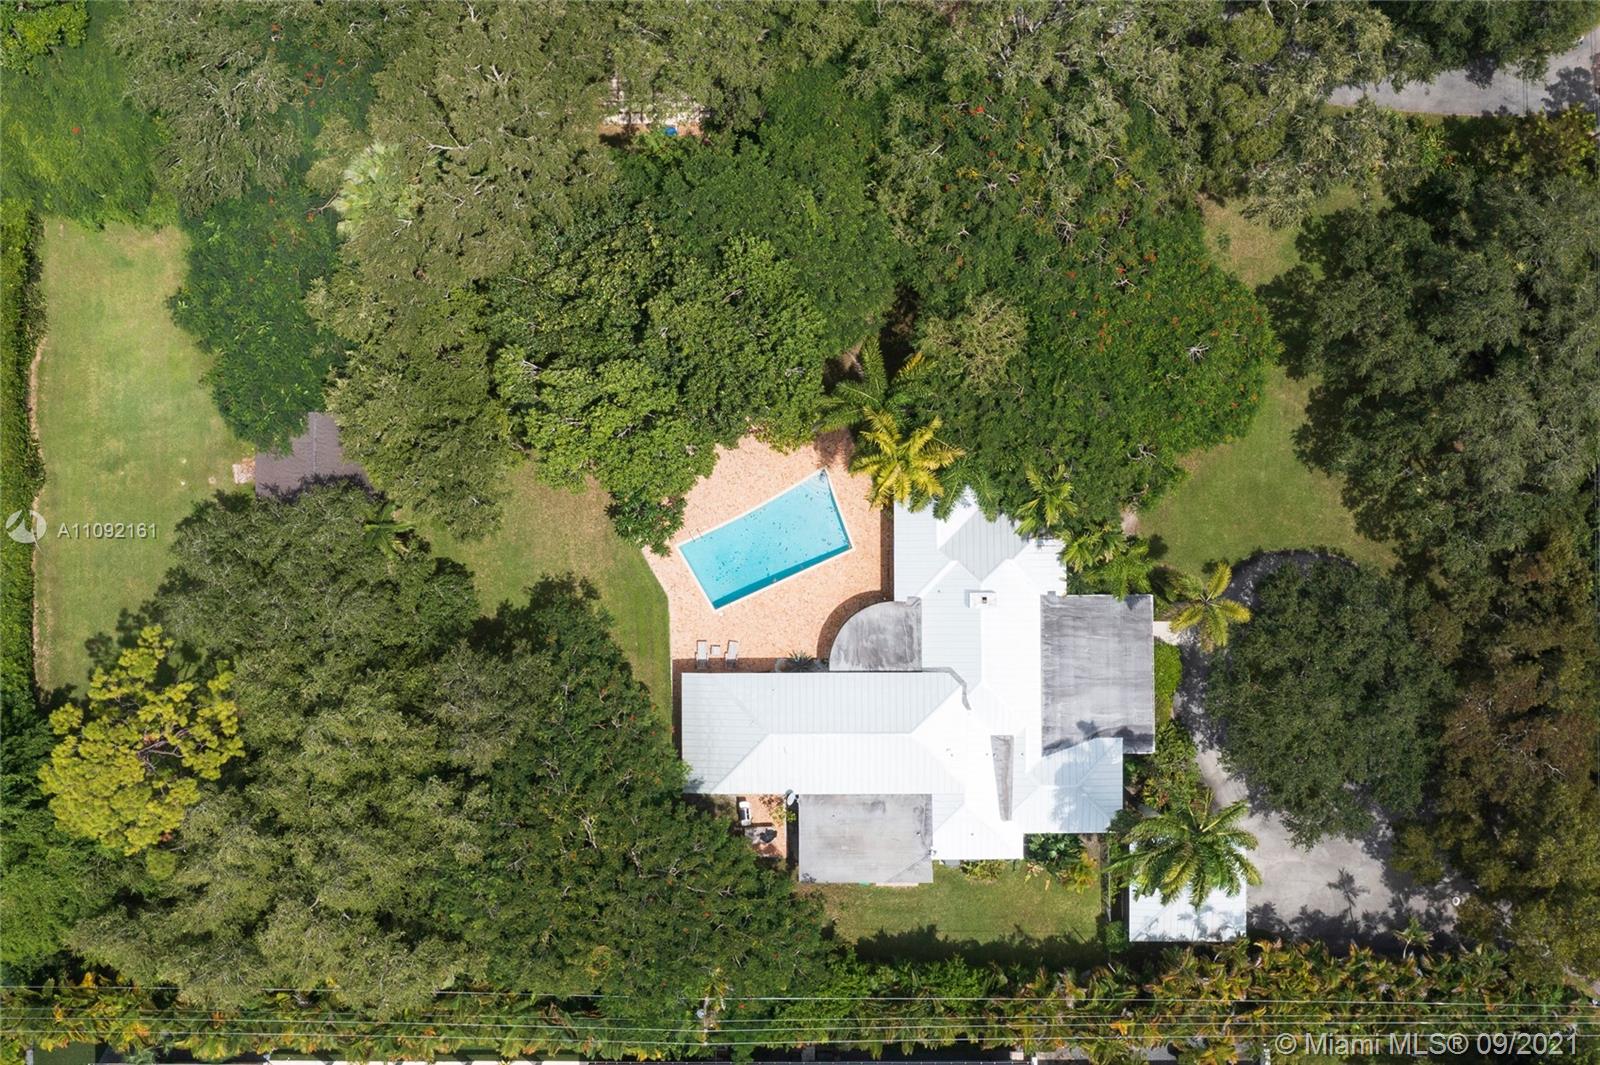 Don’t miss this rare opportunity to build or expand on a deep 1.14 acre lot in prime Northeast Pinecrest where homes currently for sale on similar lots average over $9 million. Walking distance to Gulliver Prep and just minutes from Beth Am, Our Lady of Lourdes Academy, St Thomas, Pinecrest Elementary, and great shopping and restaurants in South Miami and Dadeland. A similar property across the street recently sold for $3.2 million in just 17 days, and the least expensive home currently for sale in Northeast Pinecrest on 3/4 of an acre or more is $4.95 million so don’t miss this chance to own over an acre in one of the most exclusive neighborhoods in Miami.